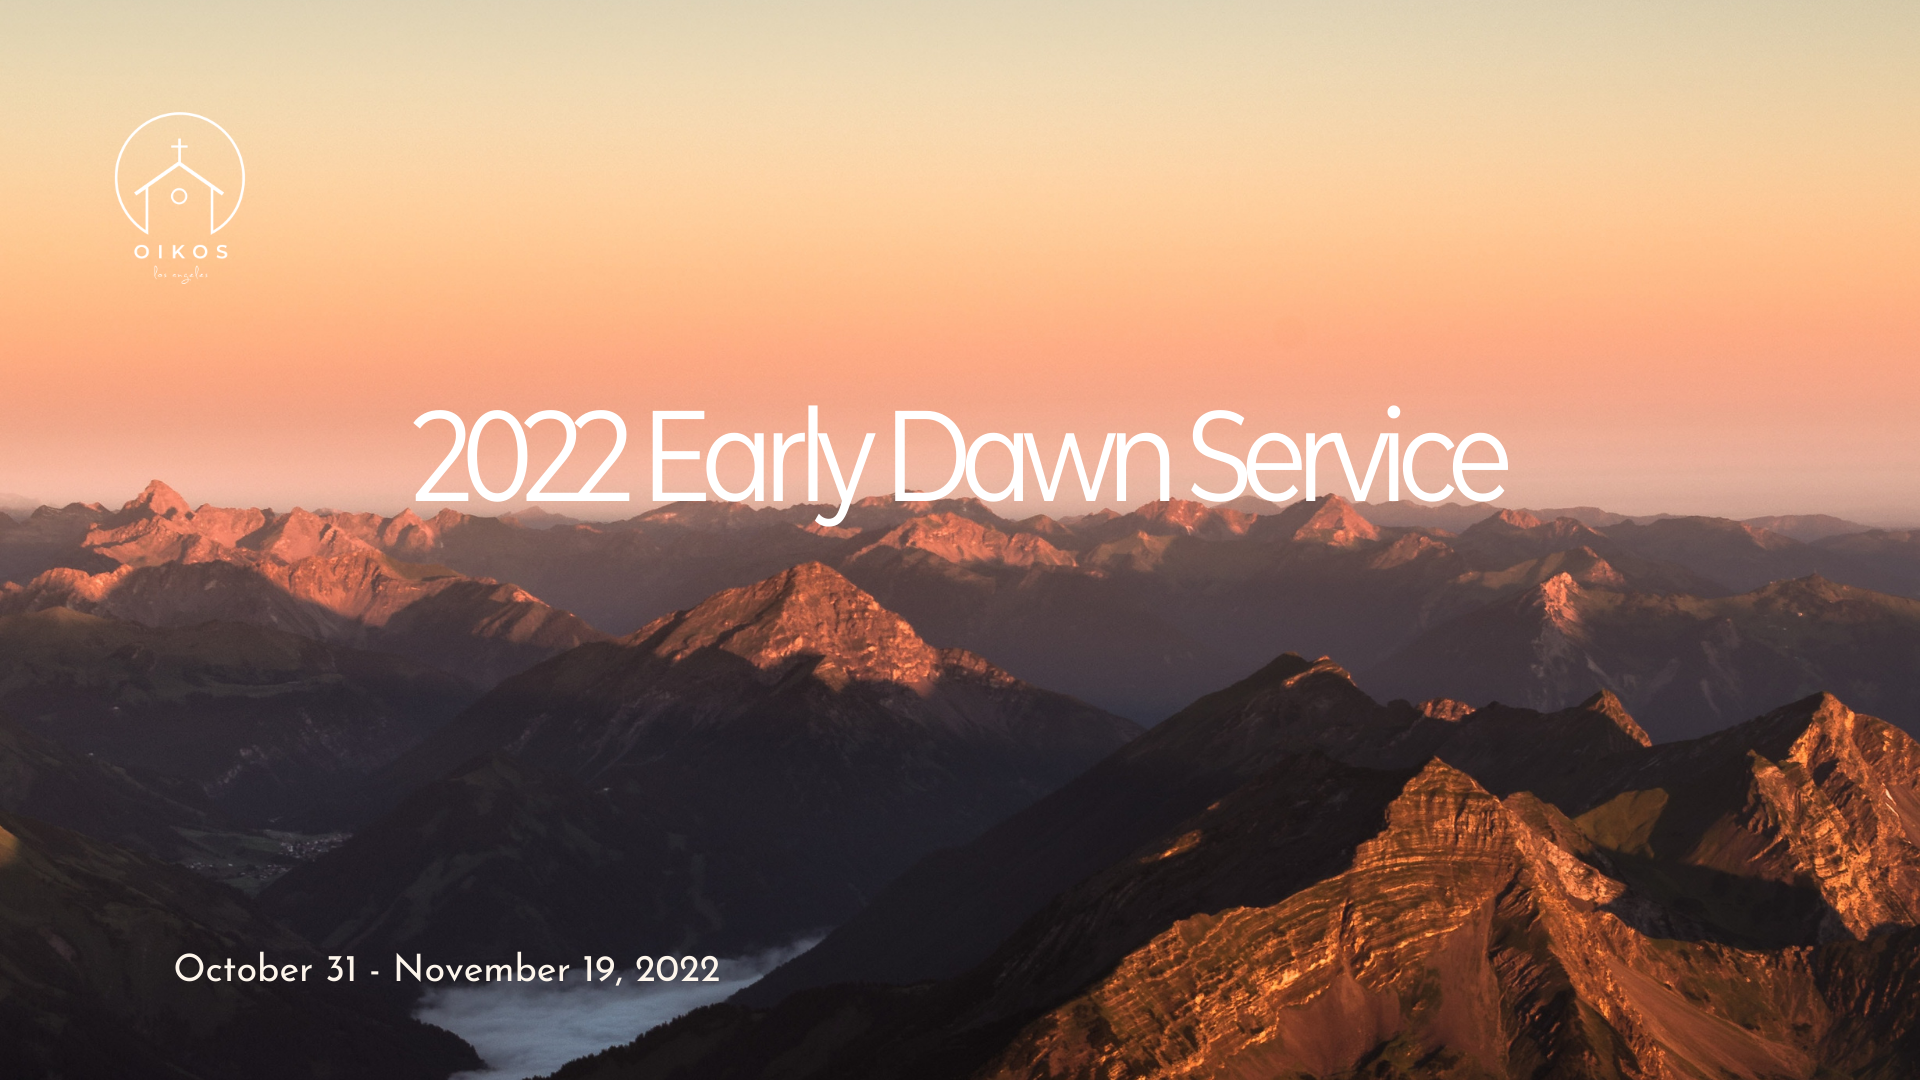 2022 Early Dawn Service image